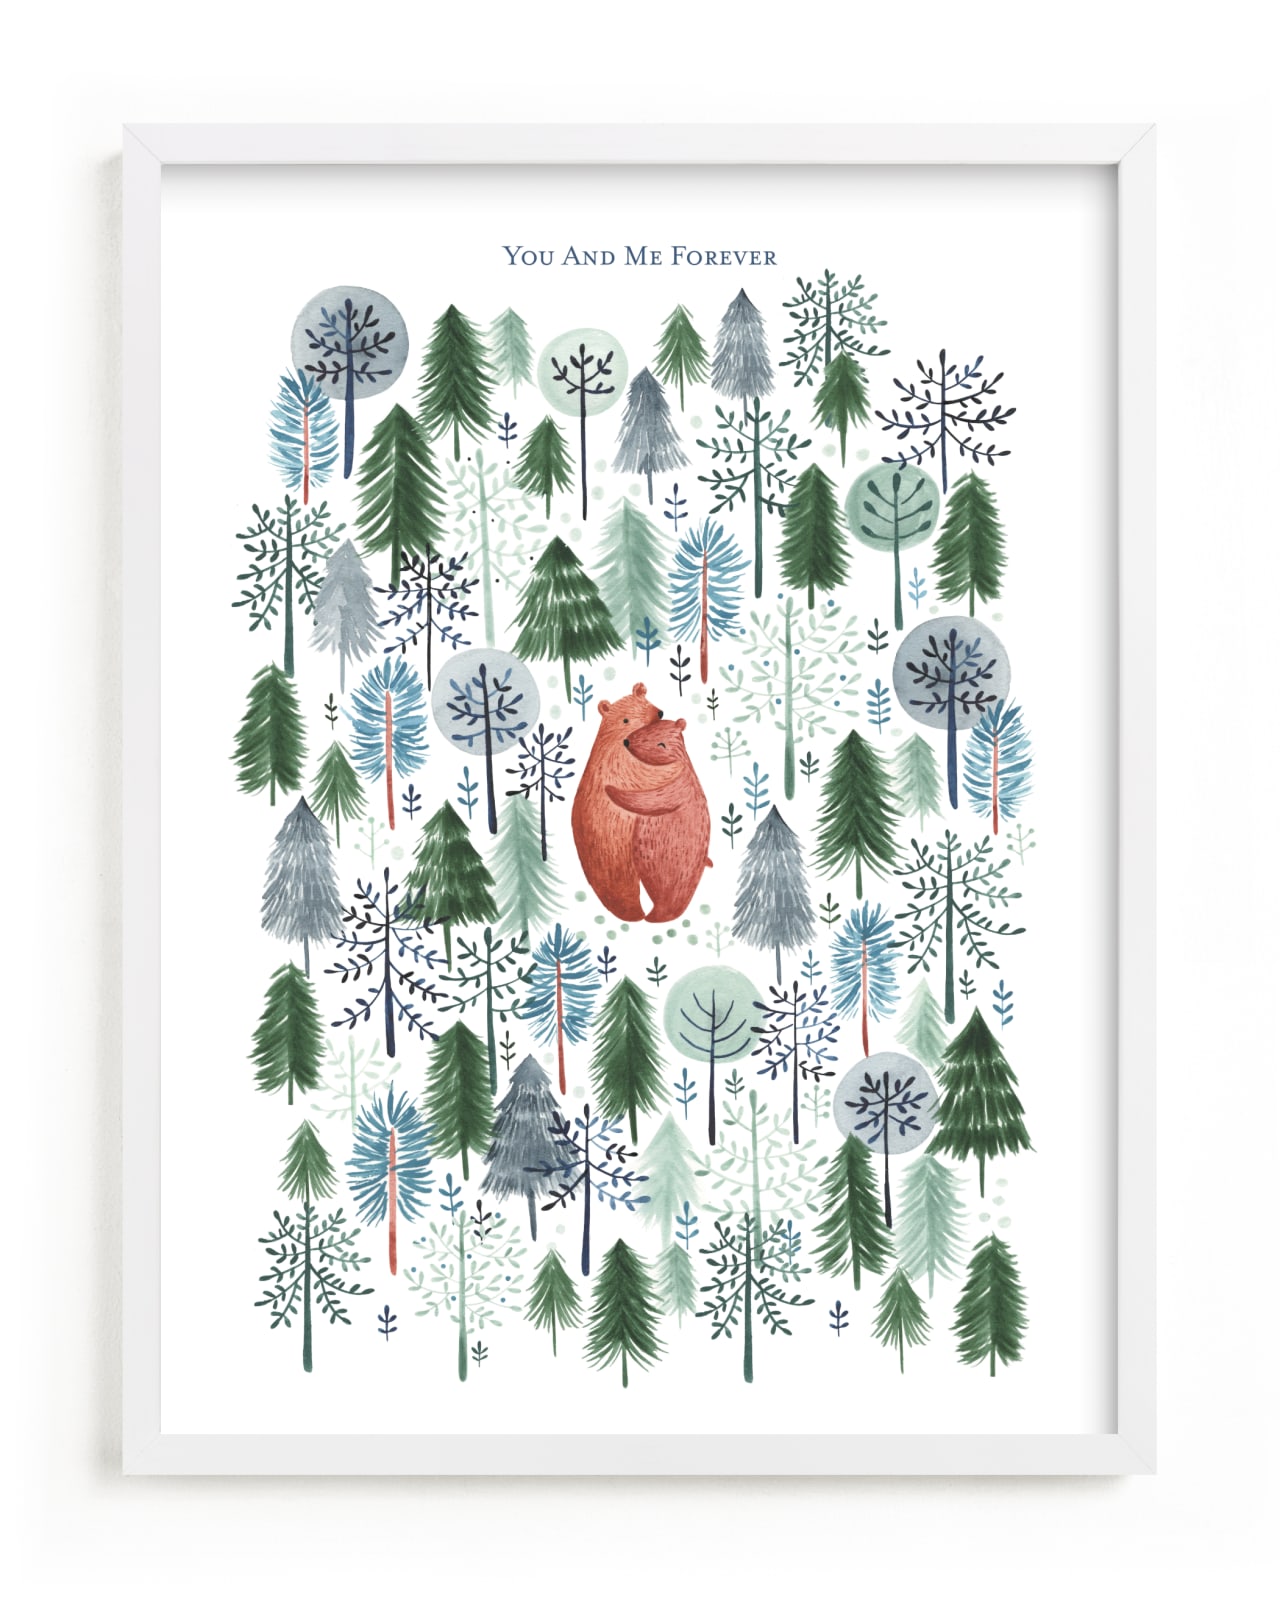 This is a blue, green nursery wall art by Sarah Knight called Never Alone.